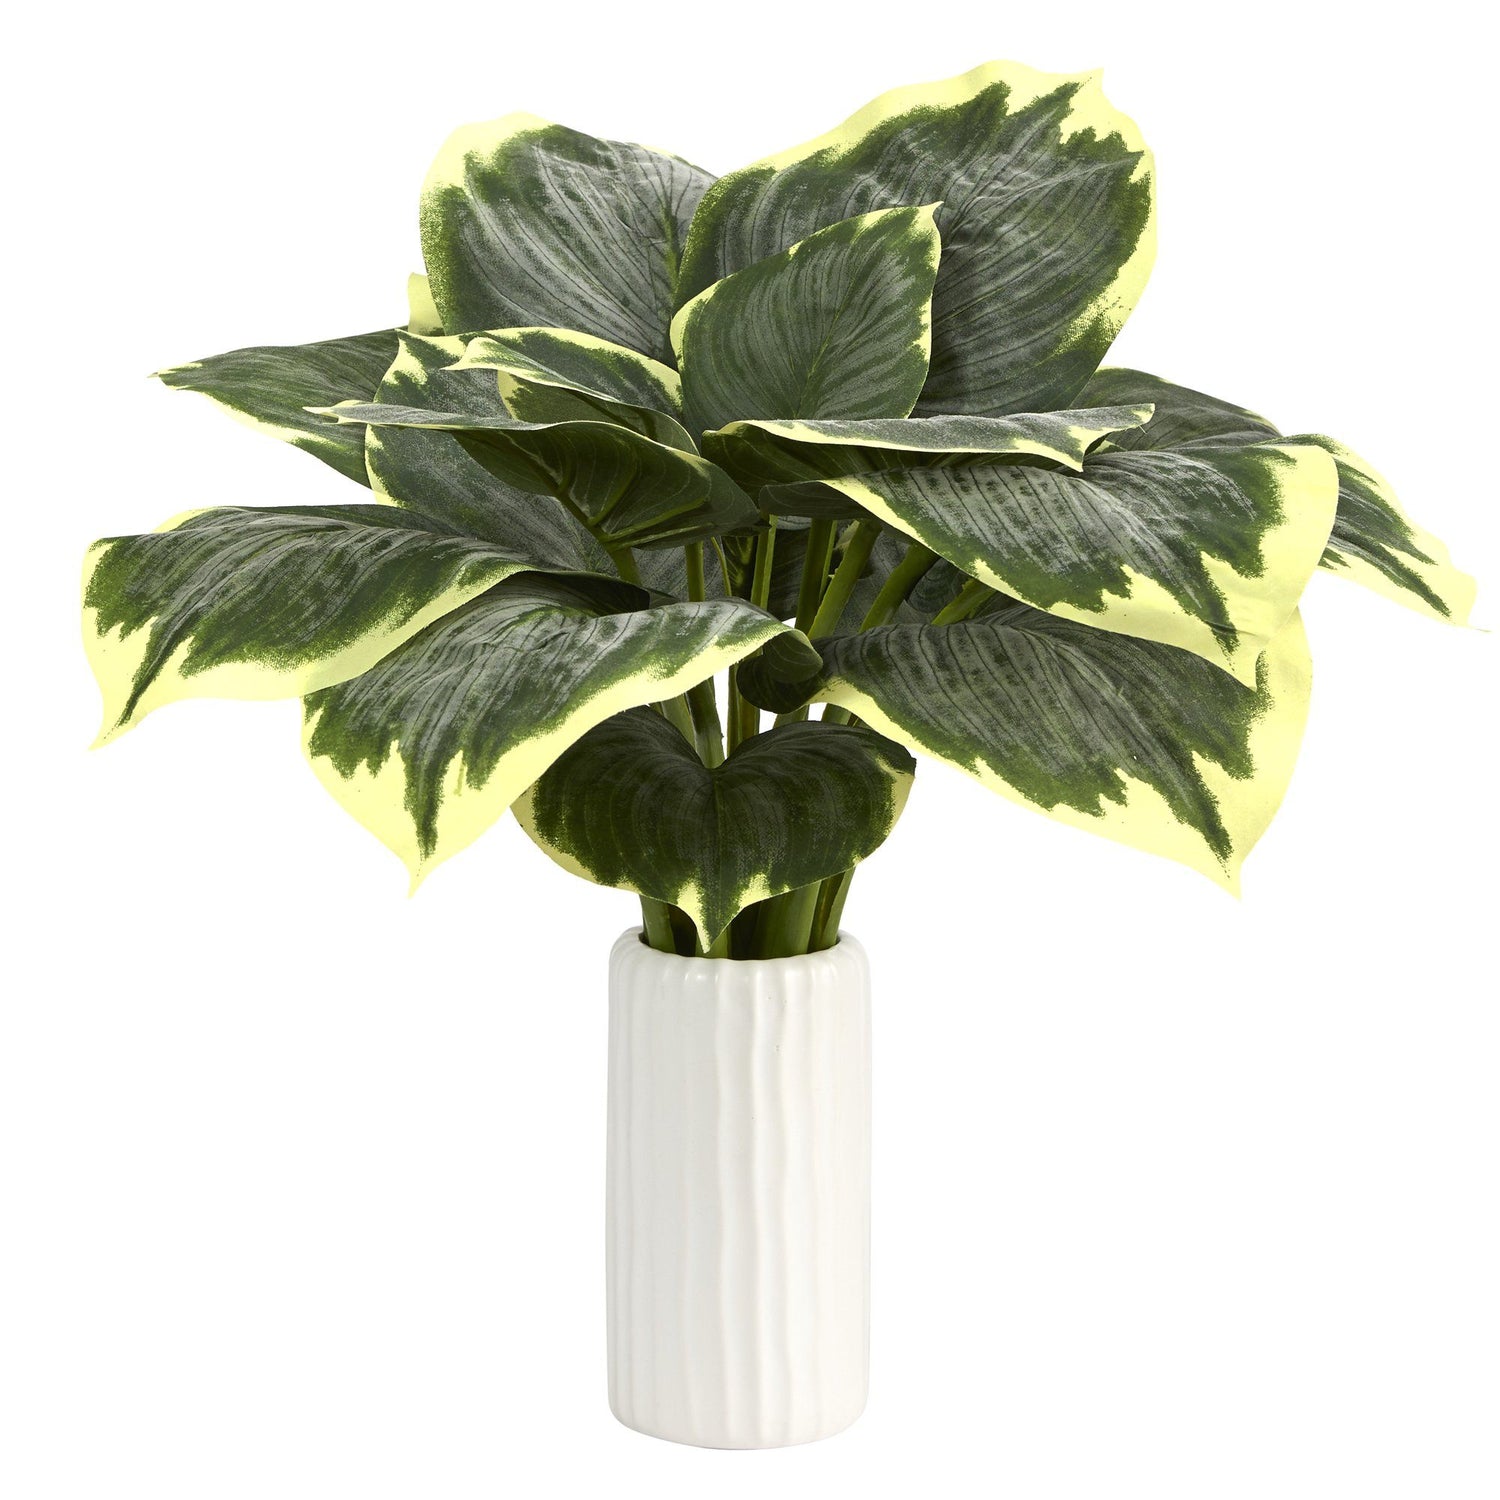 19” Variegated Hosta Artificial Plant in White Planter